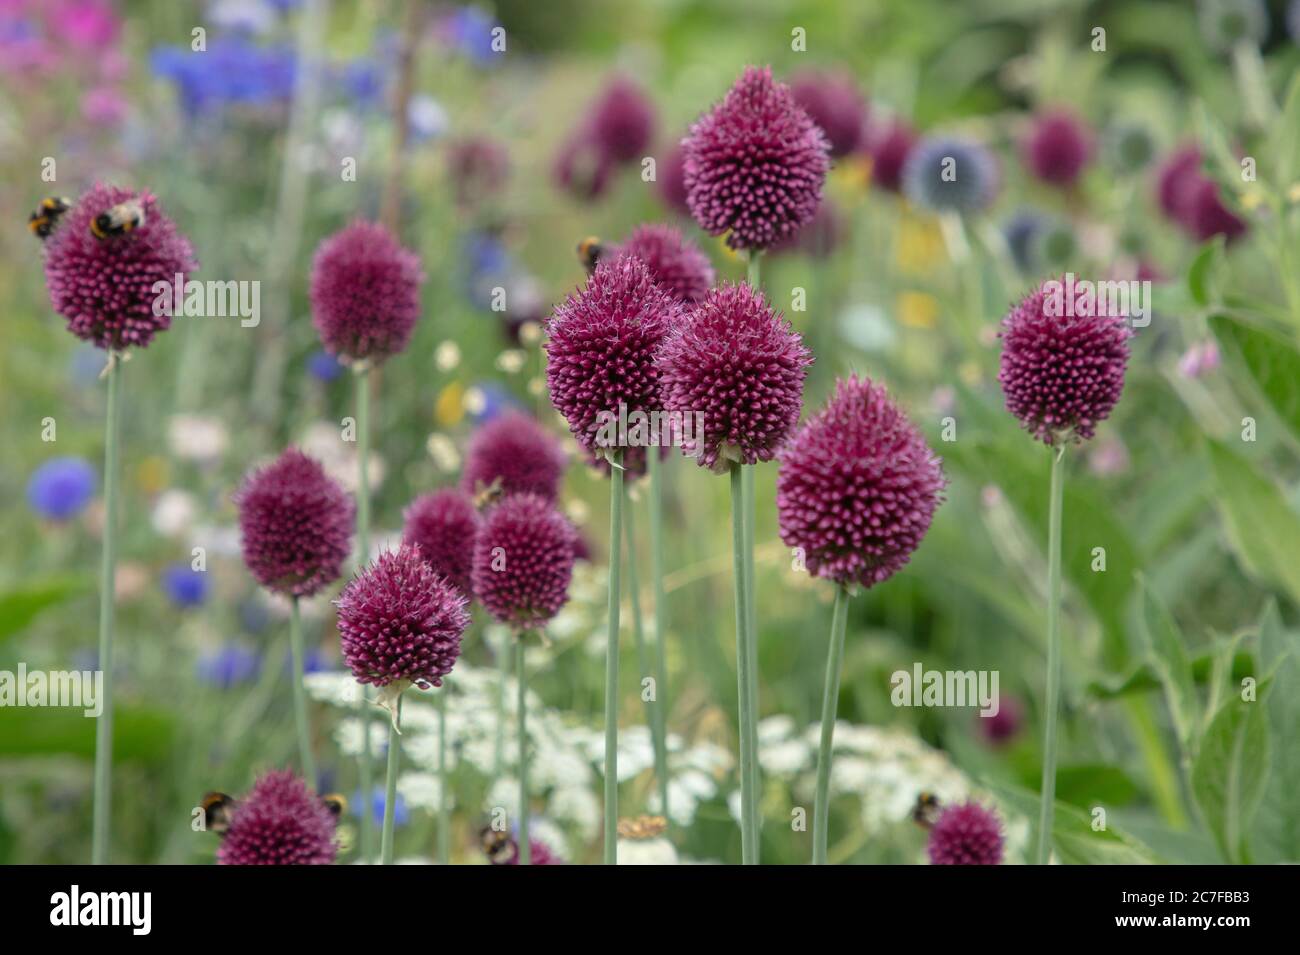 The maroon purple flowering drumsticks or Allium sphaerocephalon seen with other summer flowering plants in the garden in July. Stock Photo